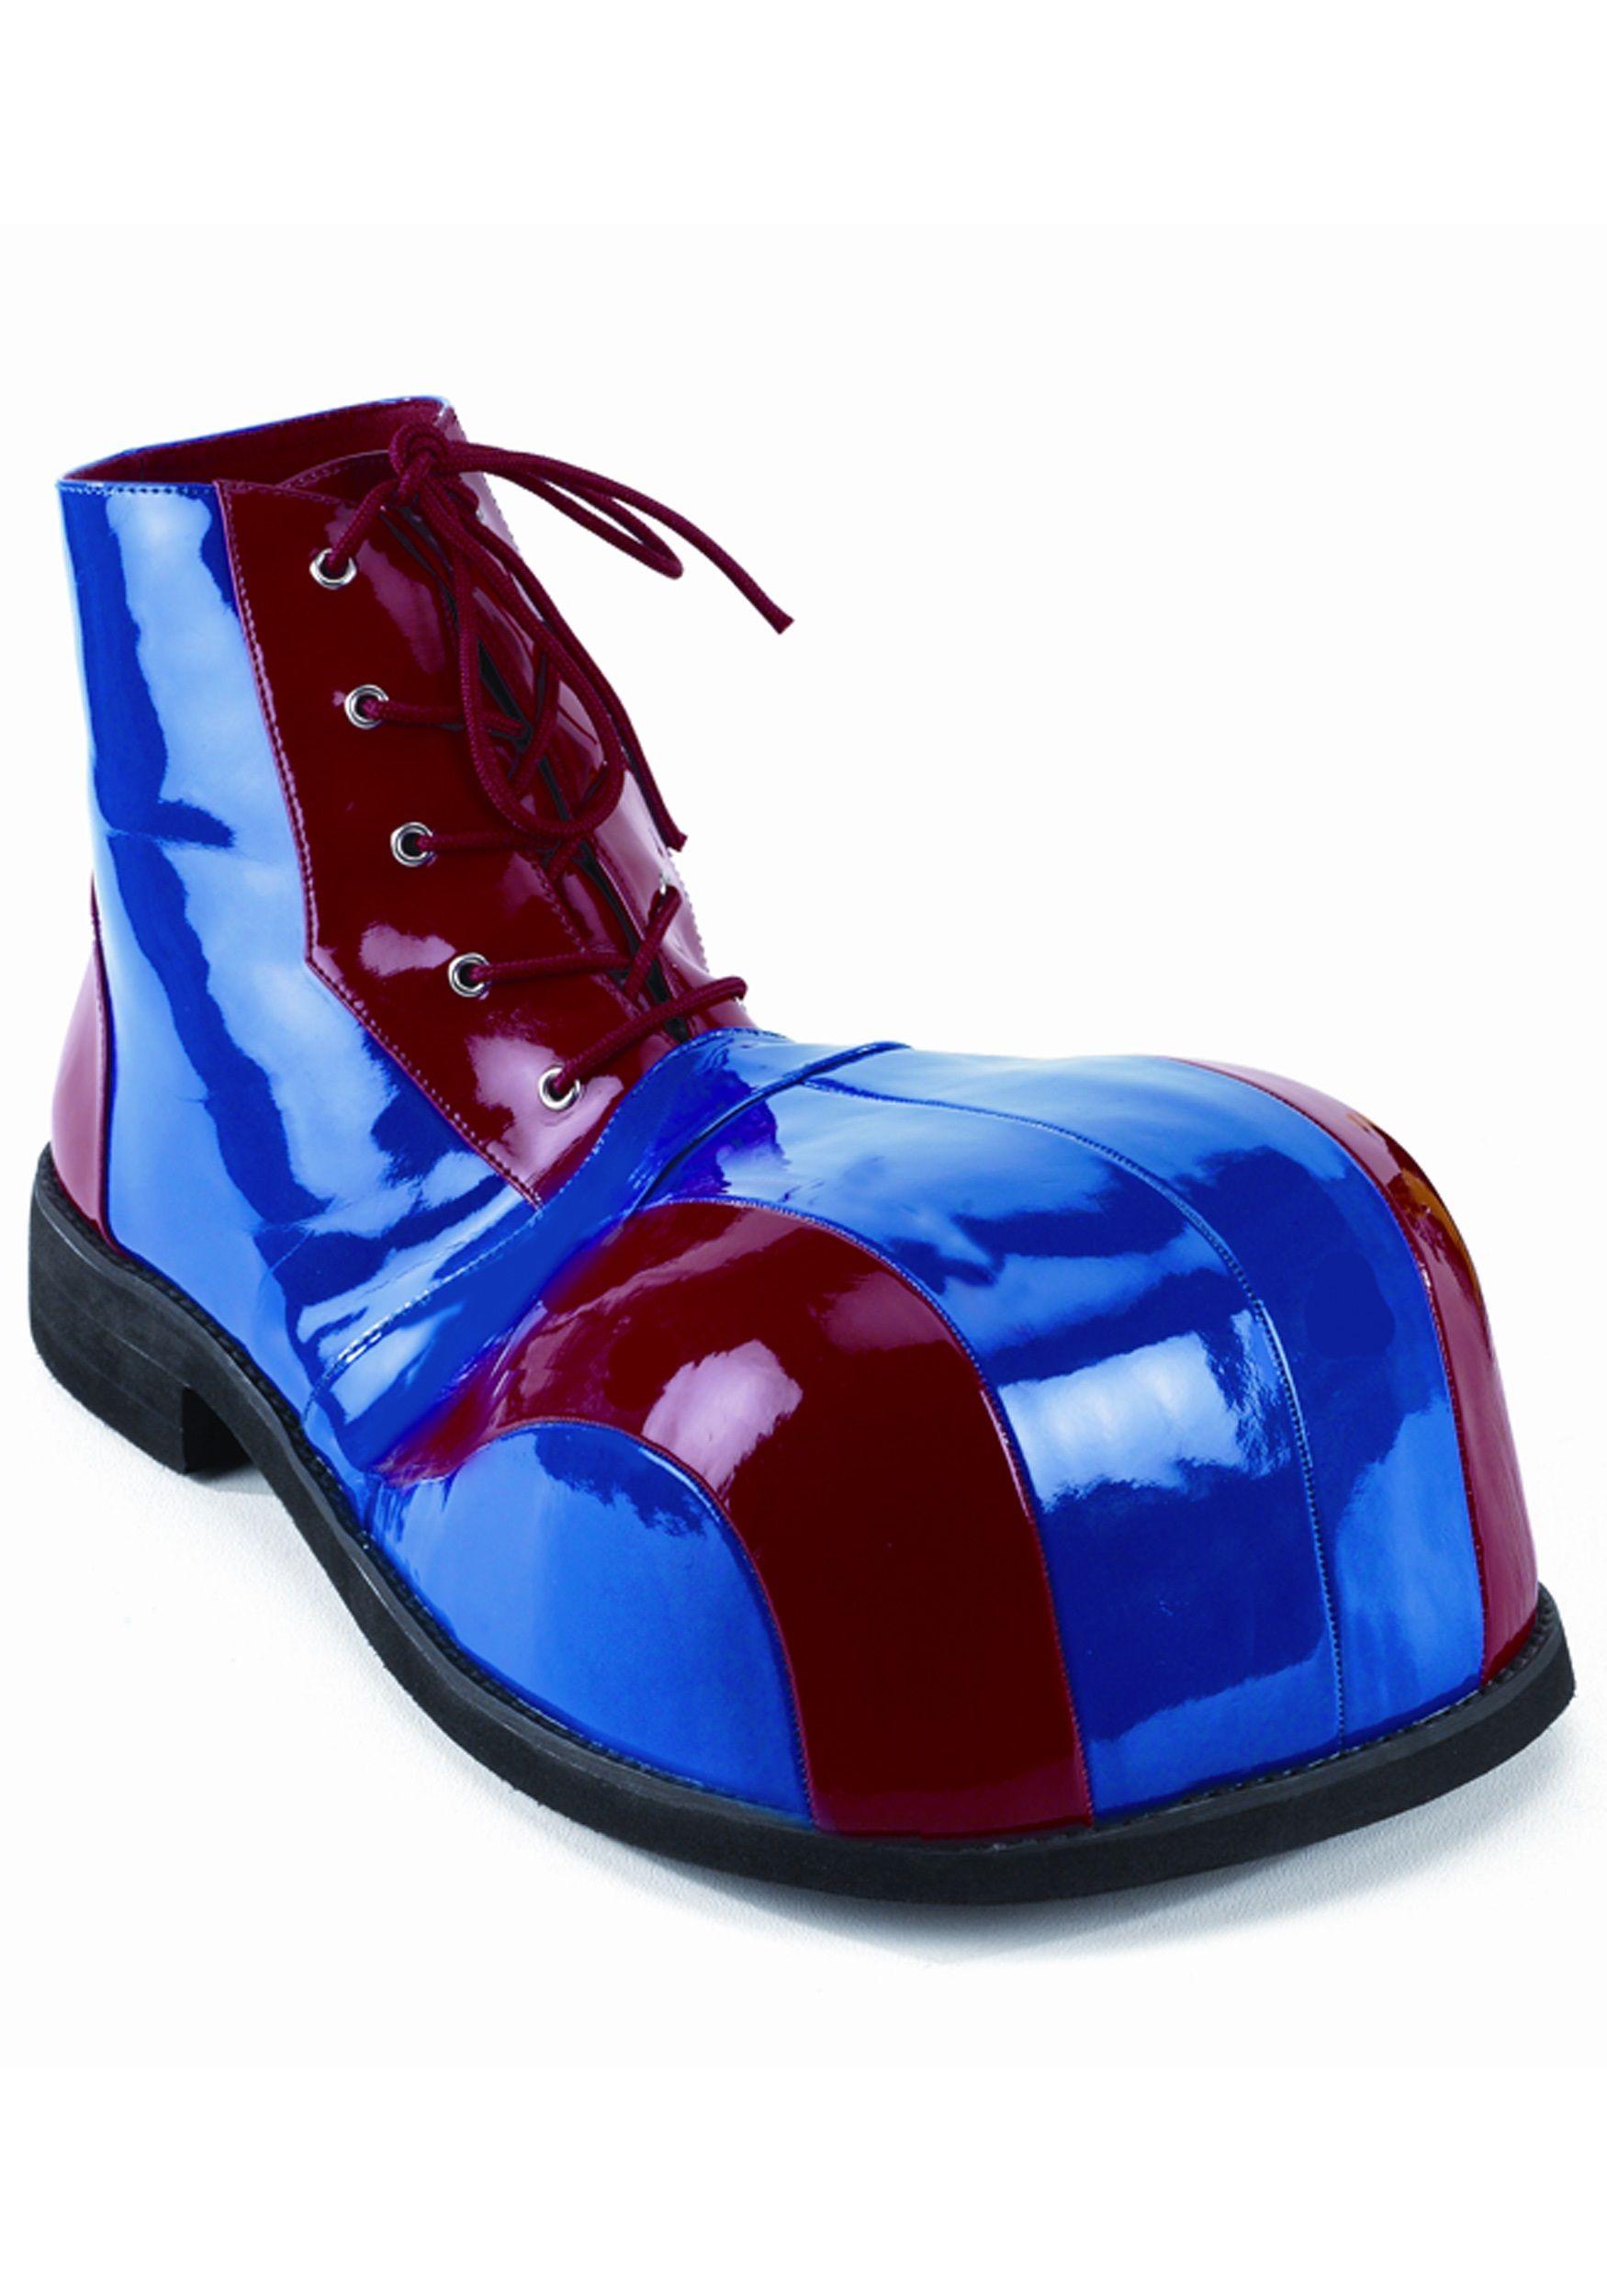 Red and Blue Shoes Logo - Blue and Red Clown Shoes